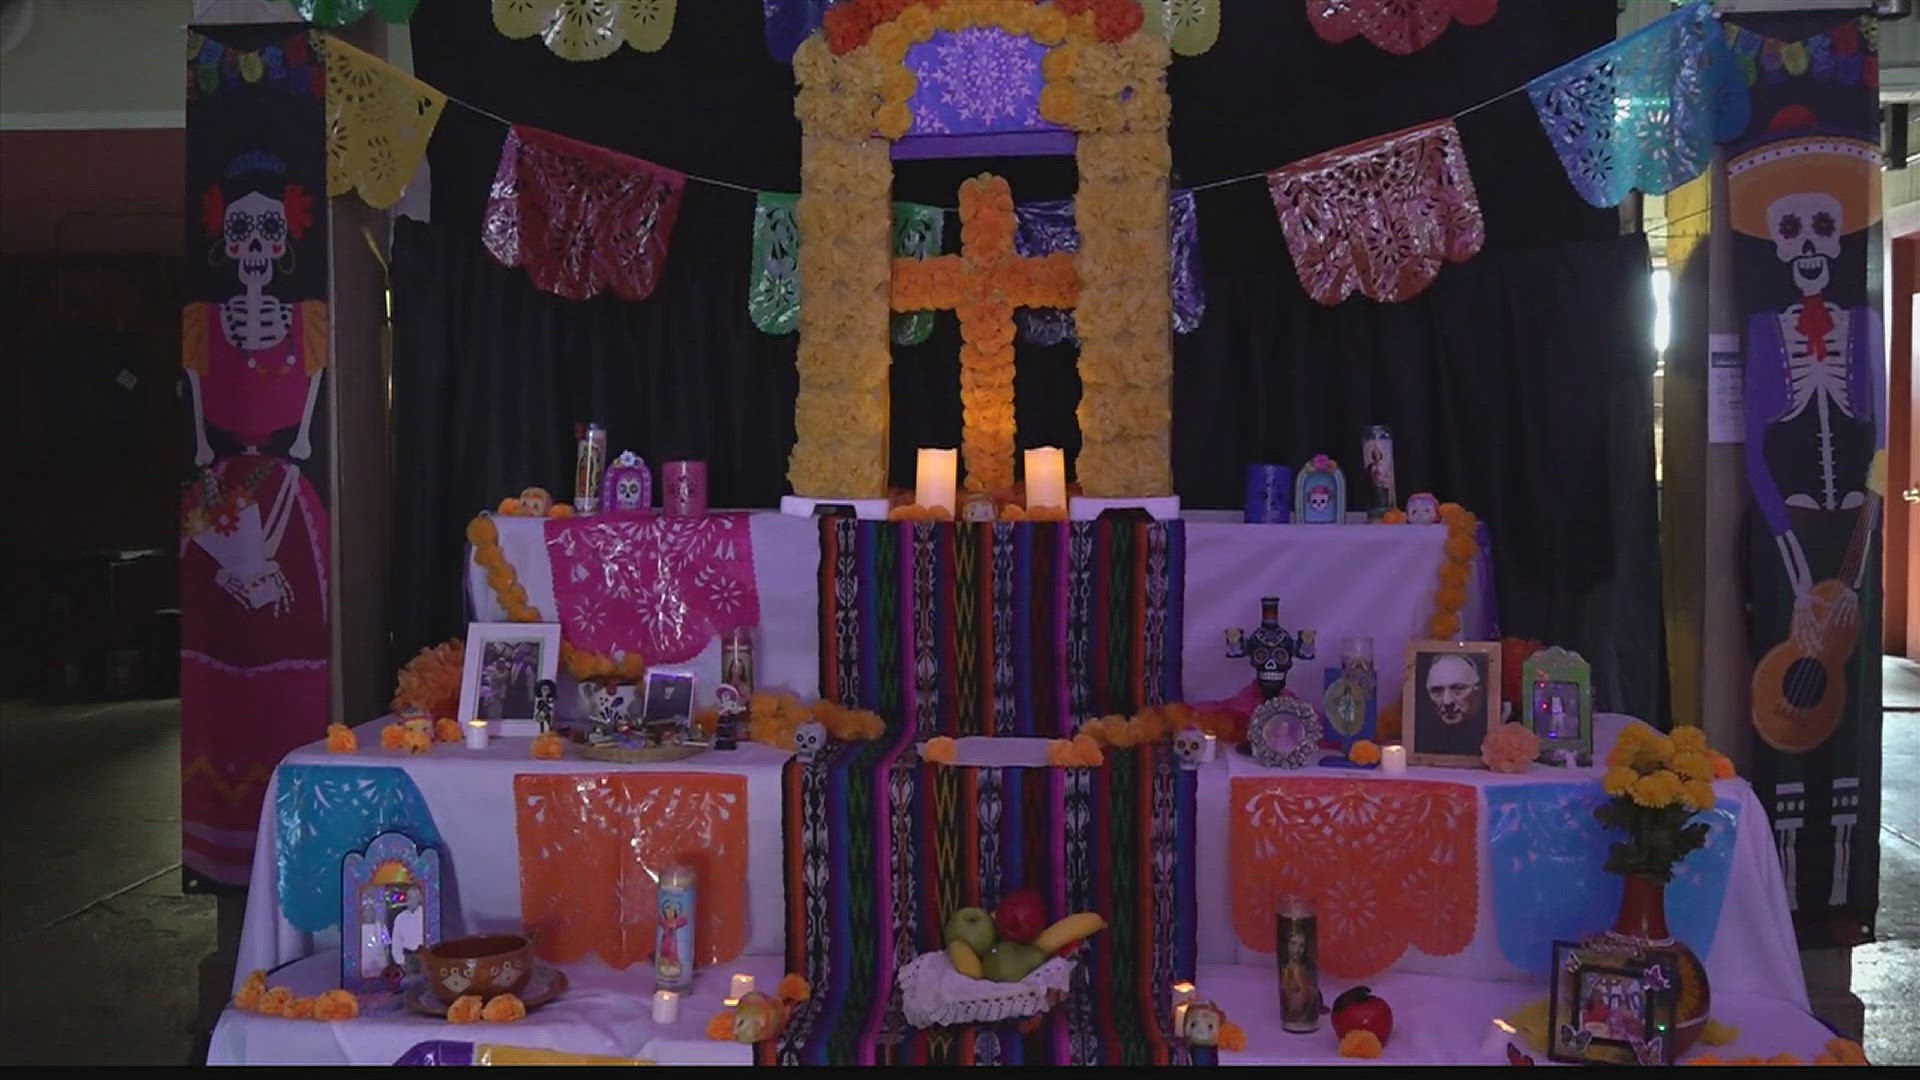 The event at High Cotton Arts is Dia de los Muertos, and it's The Day of the Dead. And it is a festival that  honors deceased loved ones.